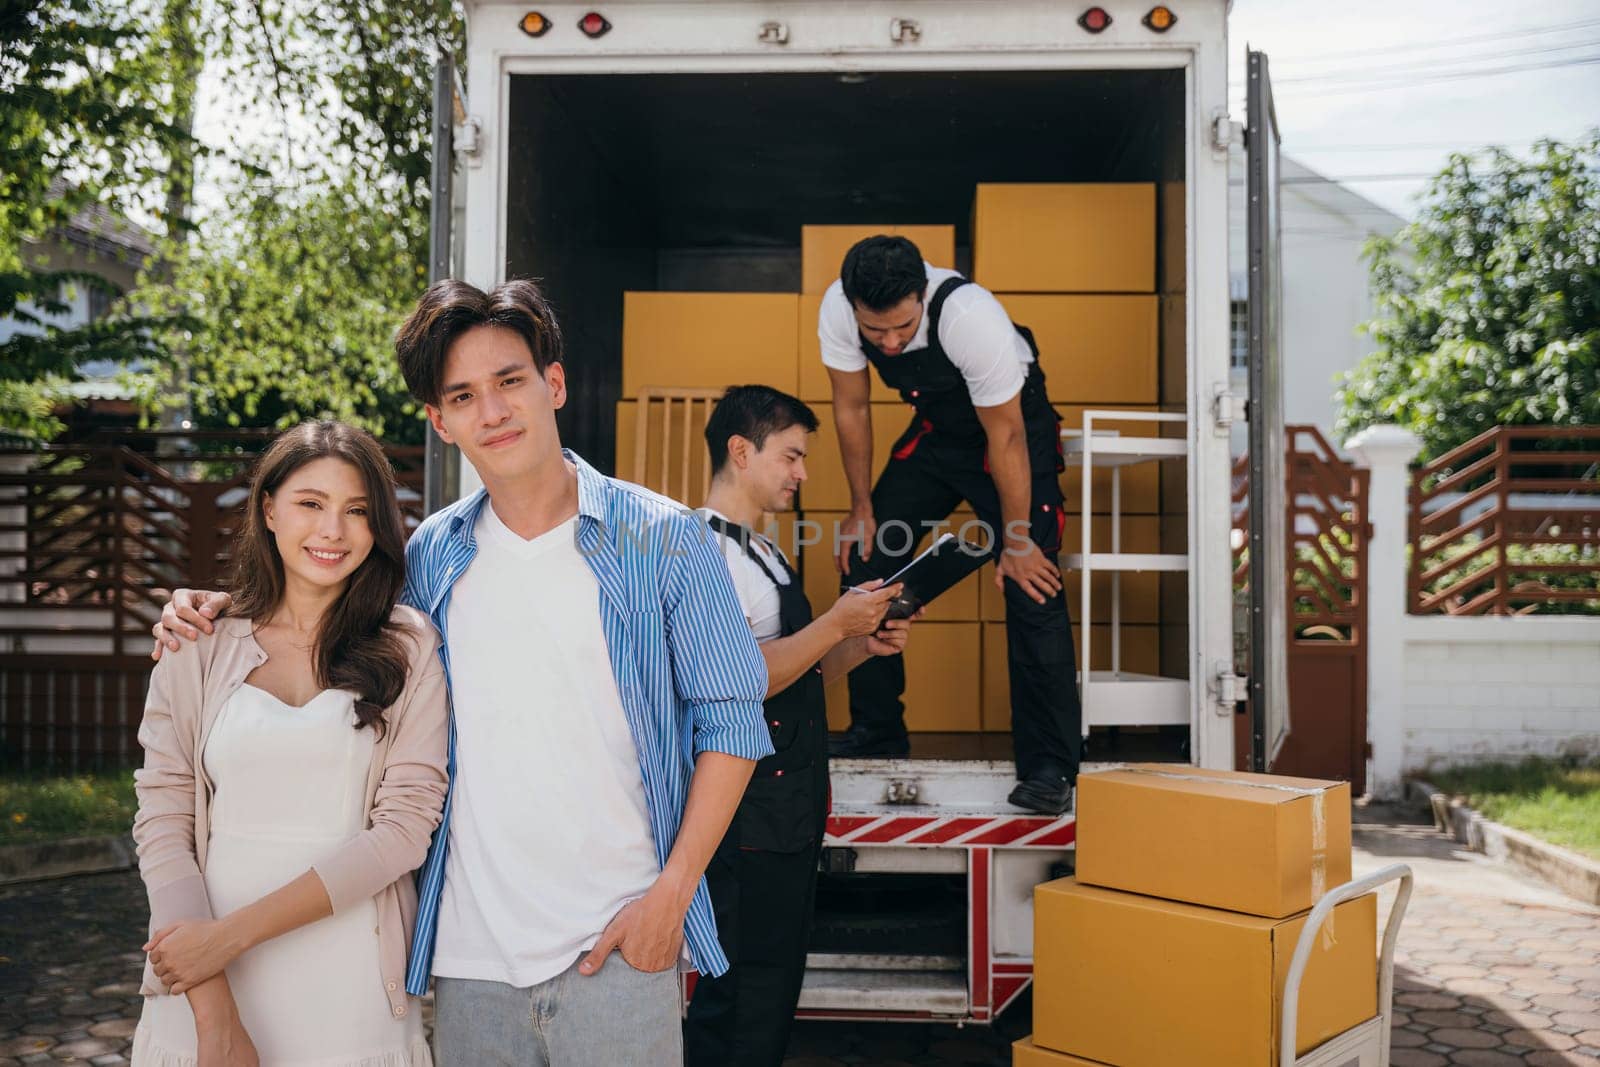 Captured in a portrait a smiling couple watches professional movers load furniture onto a truck for relocation. Quality service and teamwork for happy customers. Moving Day Concept